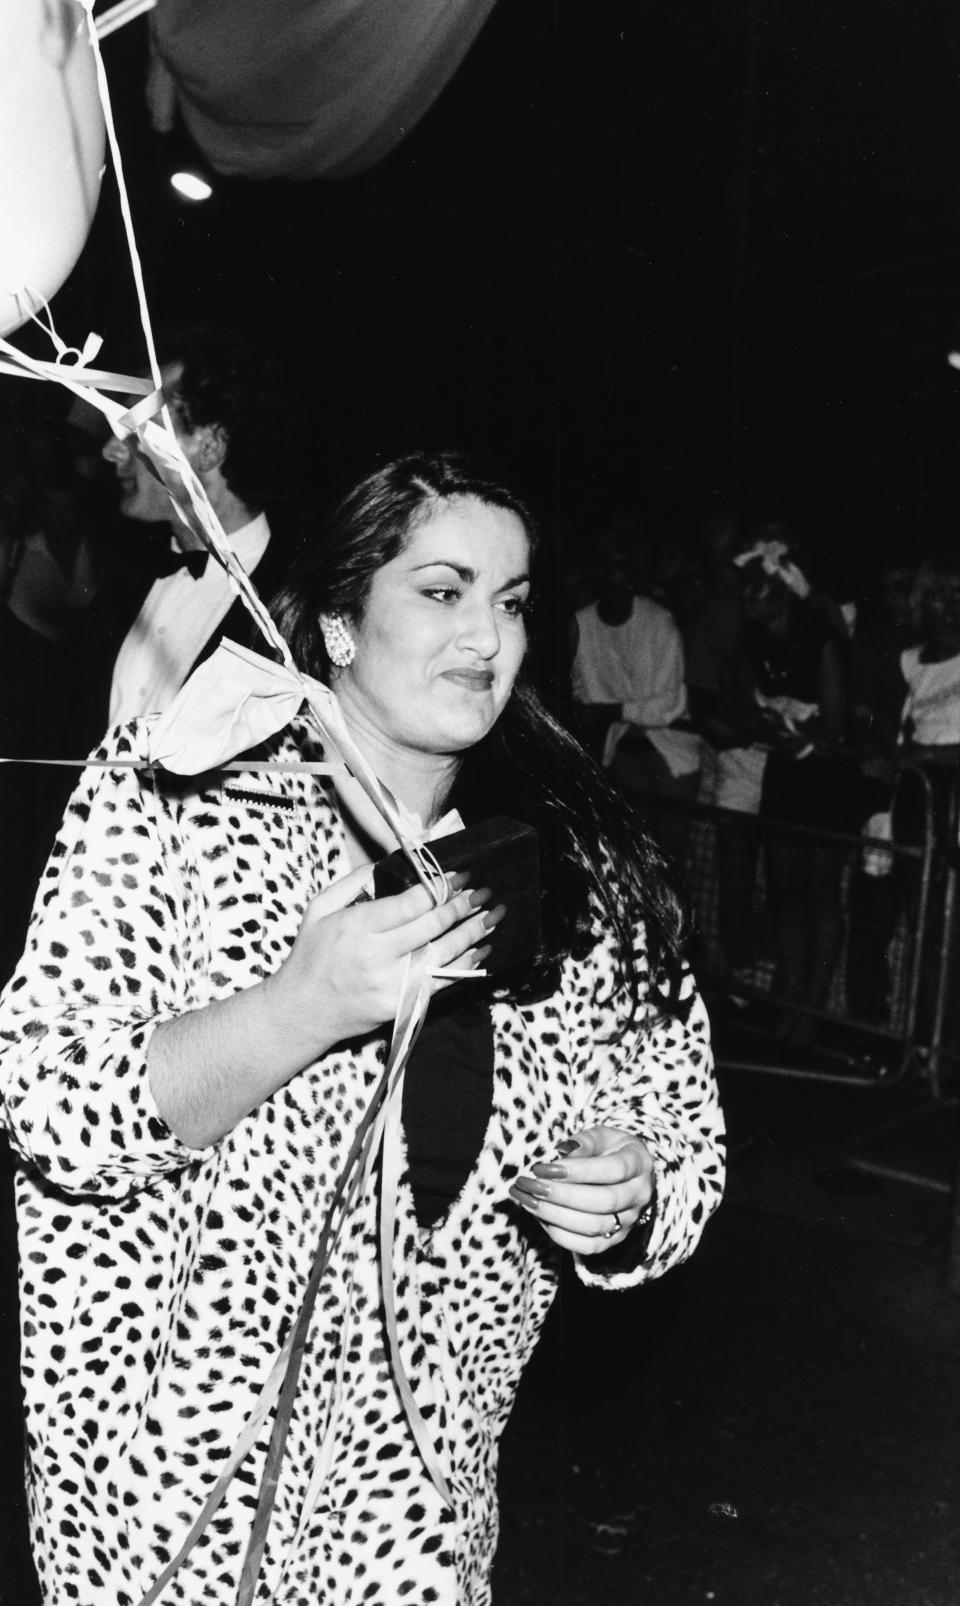 Melanie Panayiotou, sister of singer George Michael, holding balloons as she attends the Wham! farewell party, London, July 8th 1986. (Photo: Dave Hogan/Getty Images)